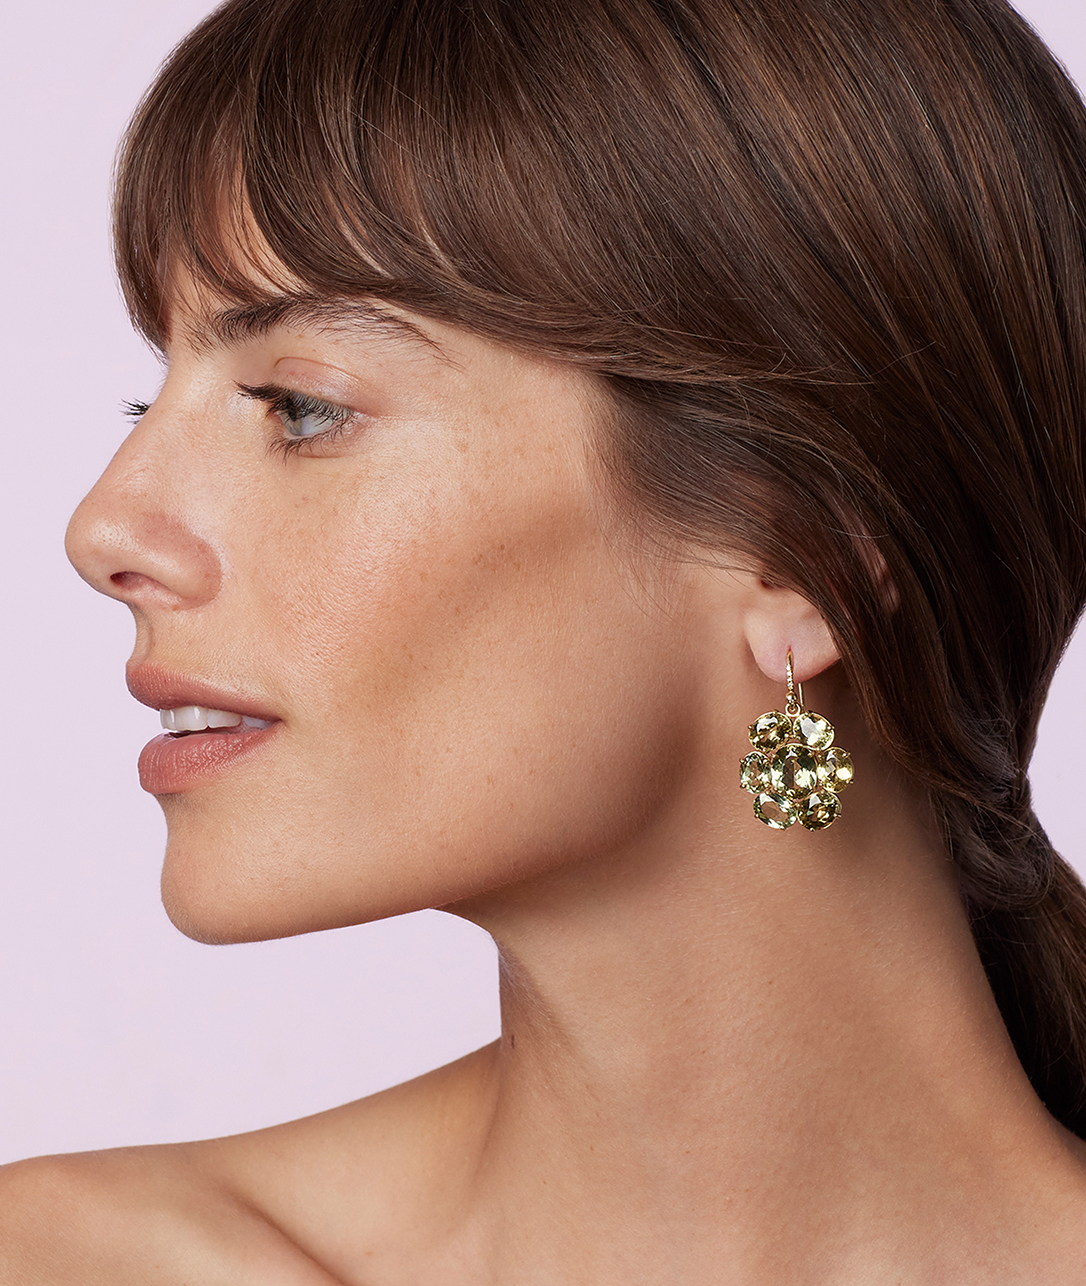 Gemmy Gem Floret Earrings find their beauty in the sum of their parts, as well as in each individual stone.SHOP GEMMY GEM FLORET EARRINGS